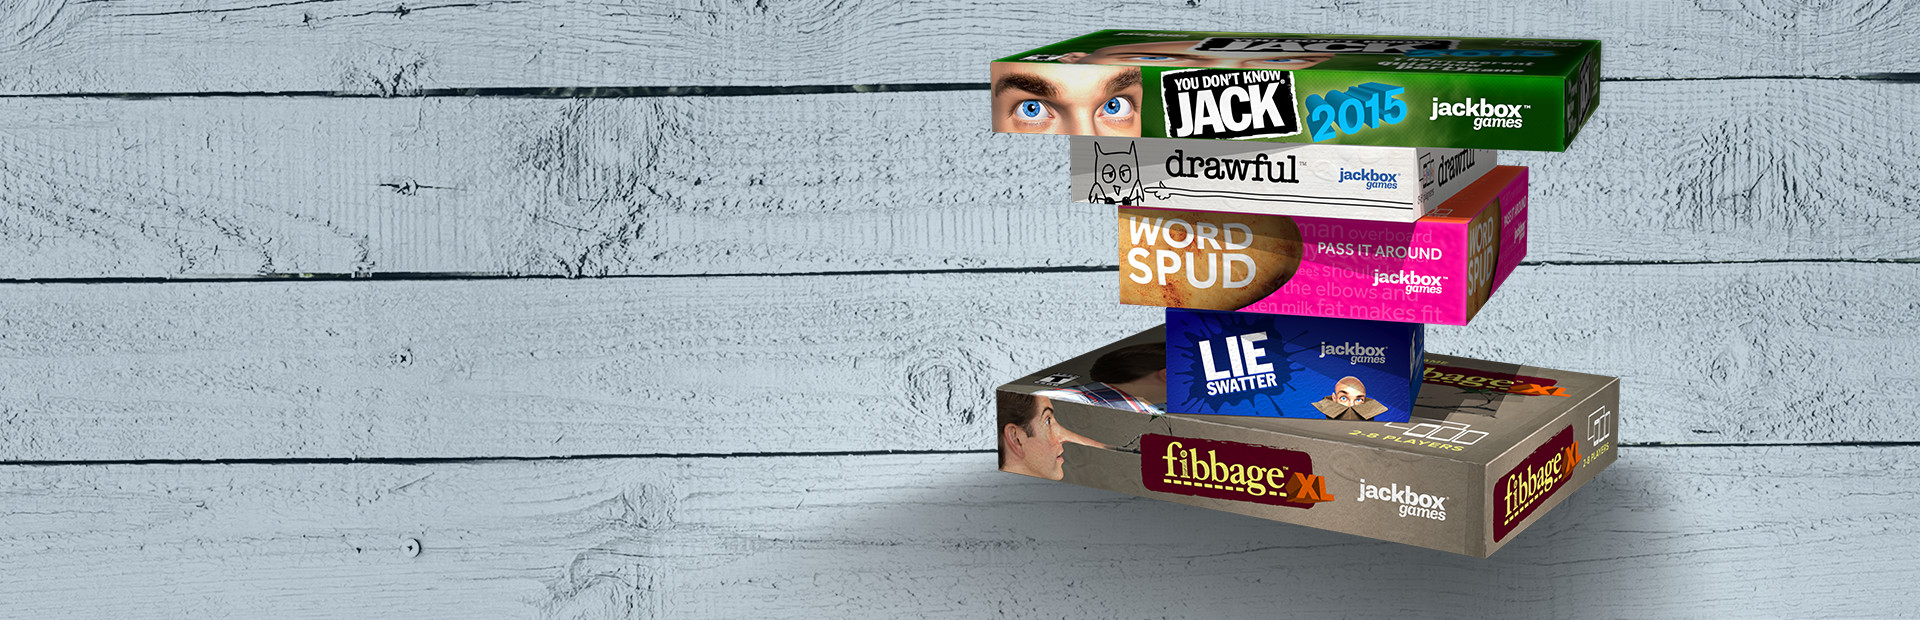 The Jackbox Party Pack cover image